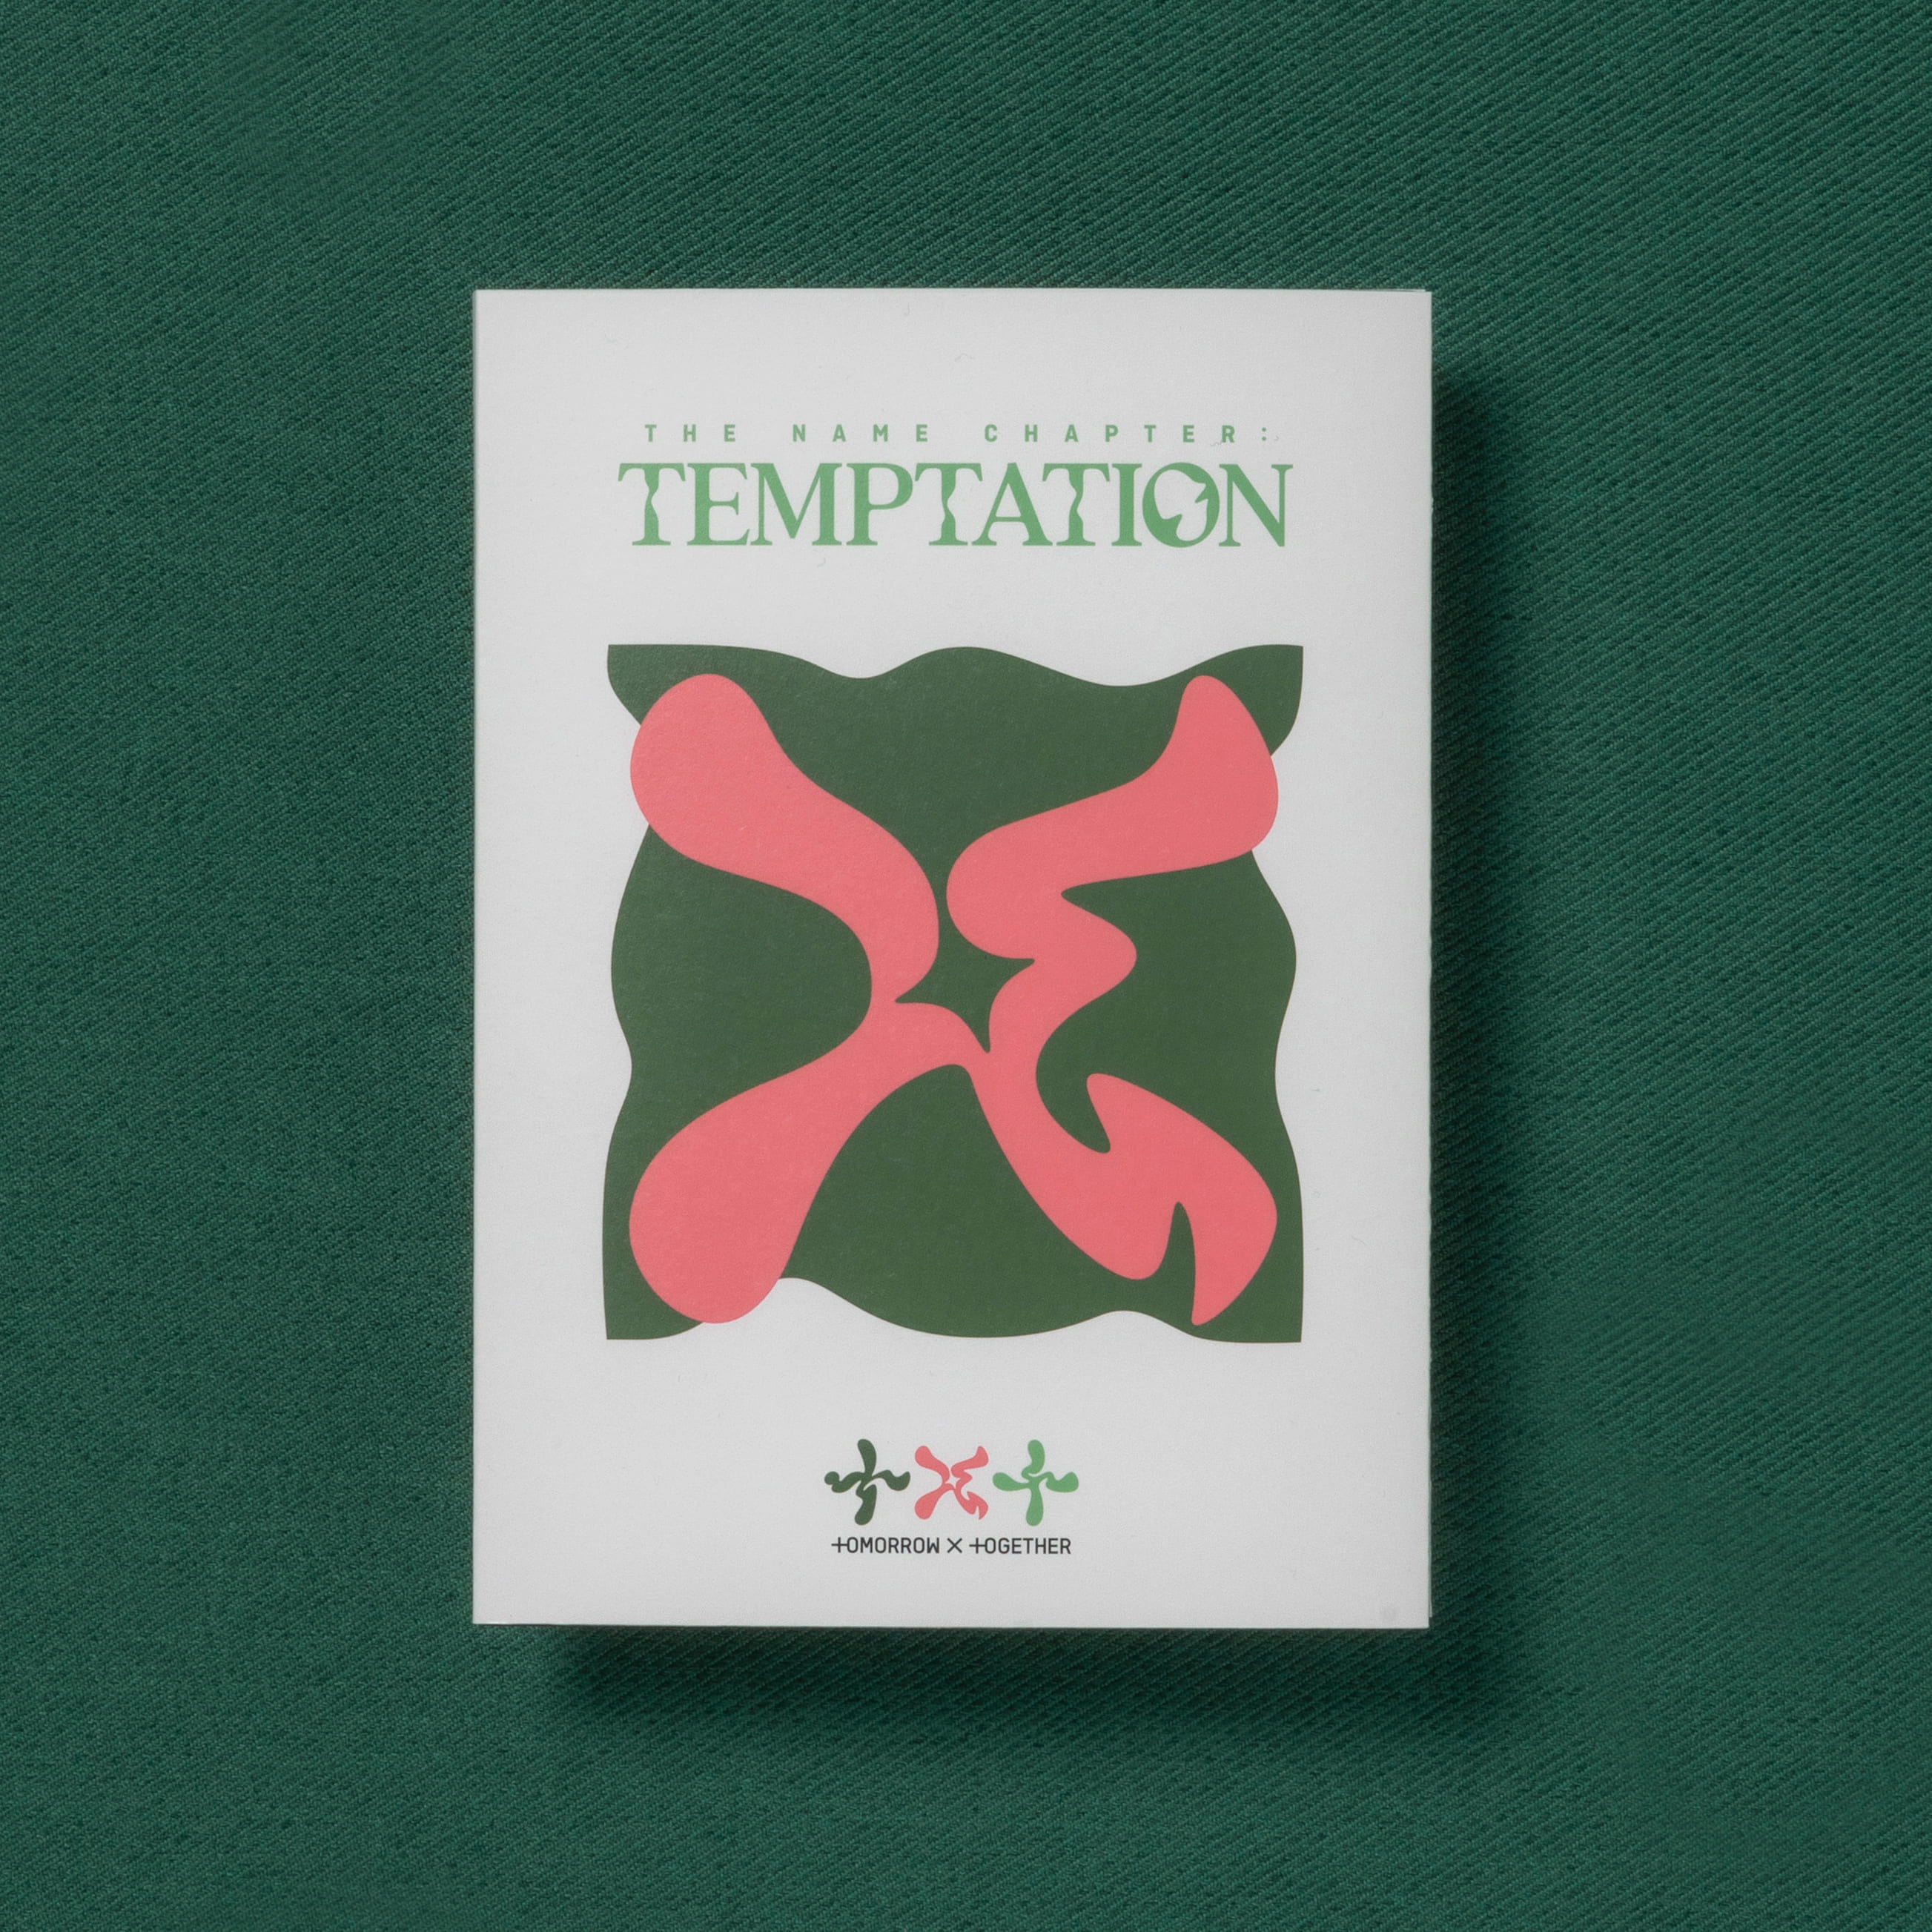 TOMORROW X TOGETHER 5th Mini Album THE NAME CHAPTER: TEMPTATION (Lullaby Version)